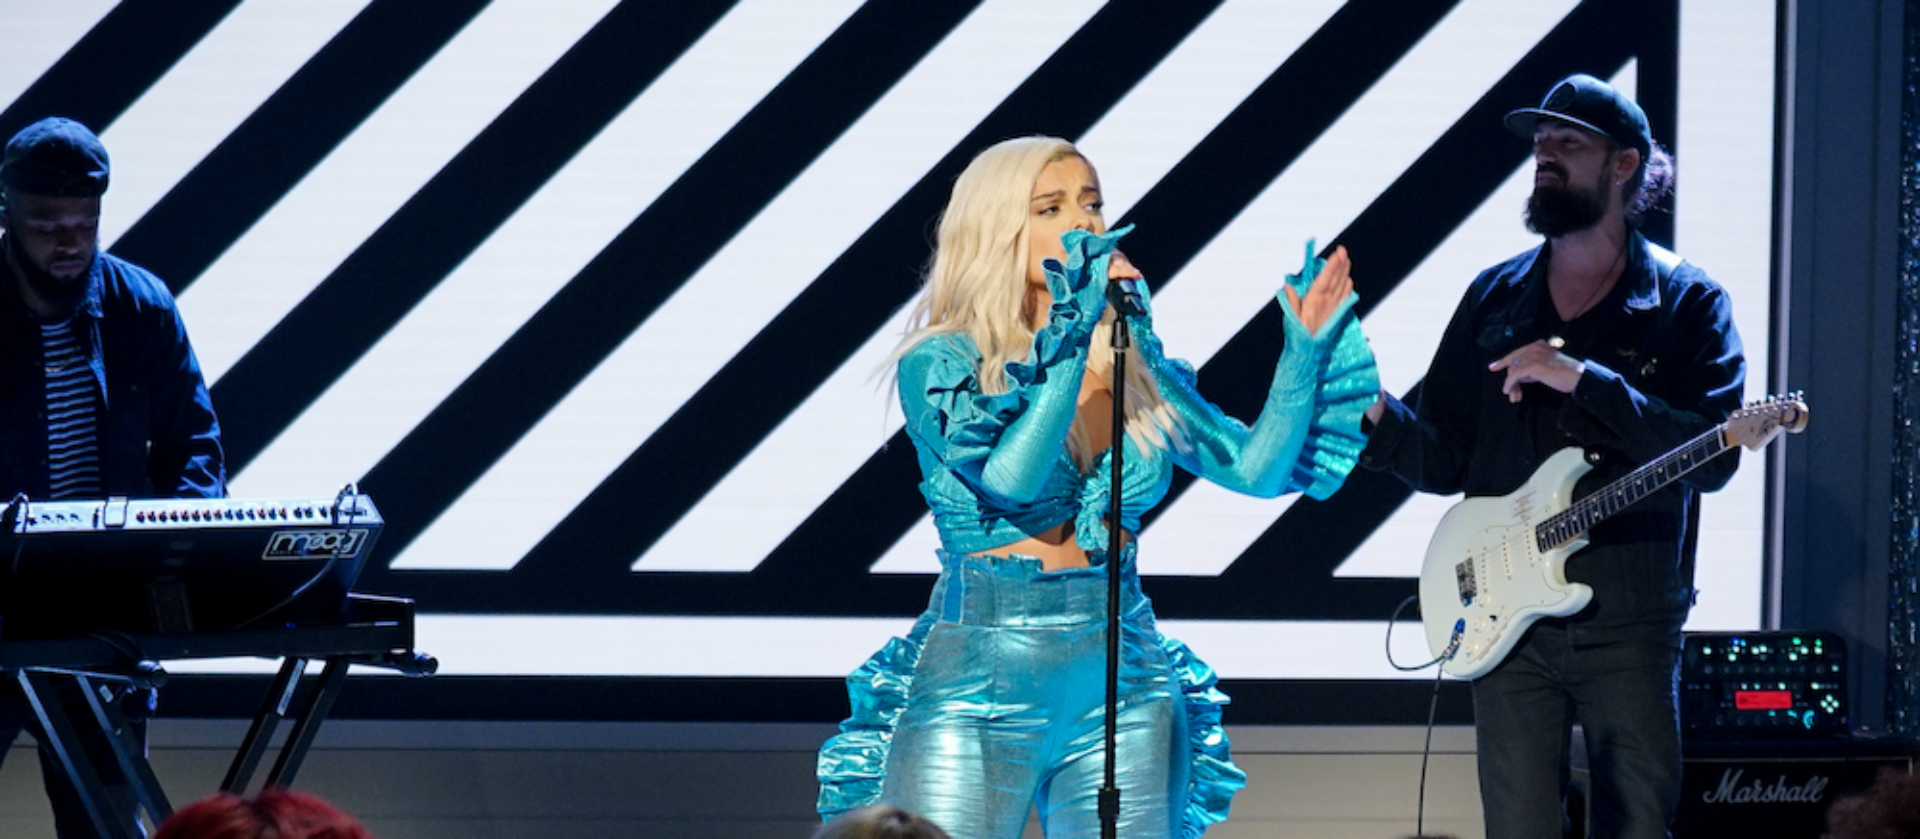 Violent concert encounters with female artists spark concern among fans after both Bebe Rexha and Ava Max were attacked onstage this week.